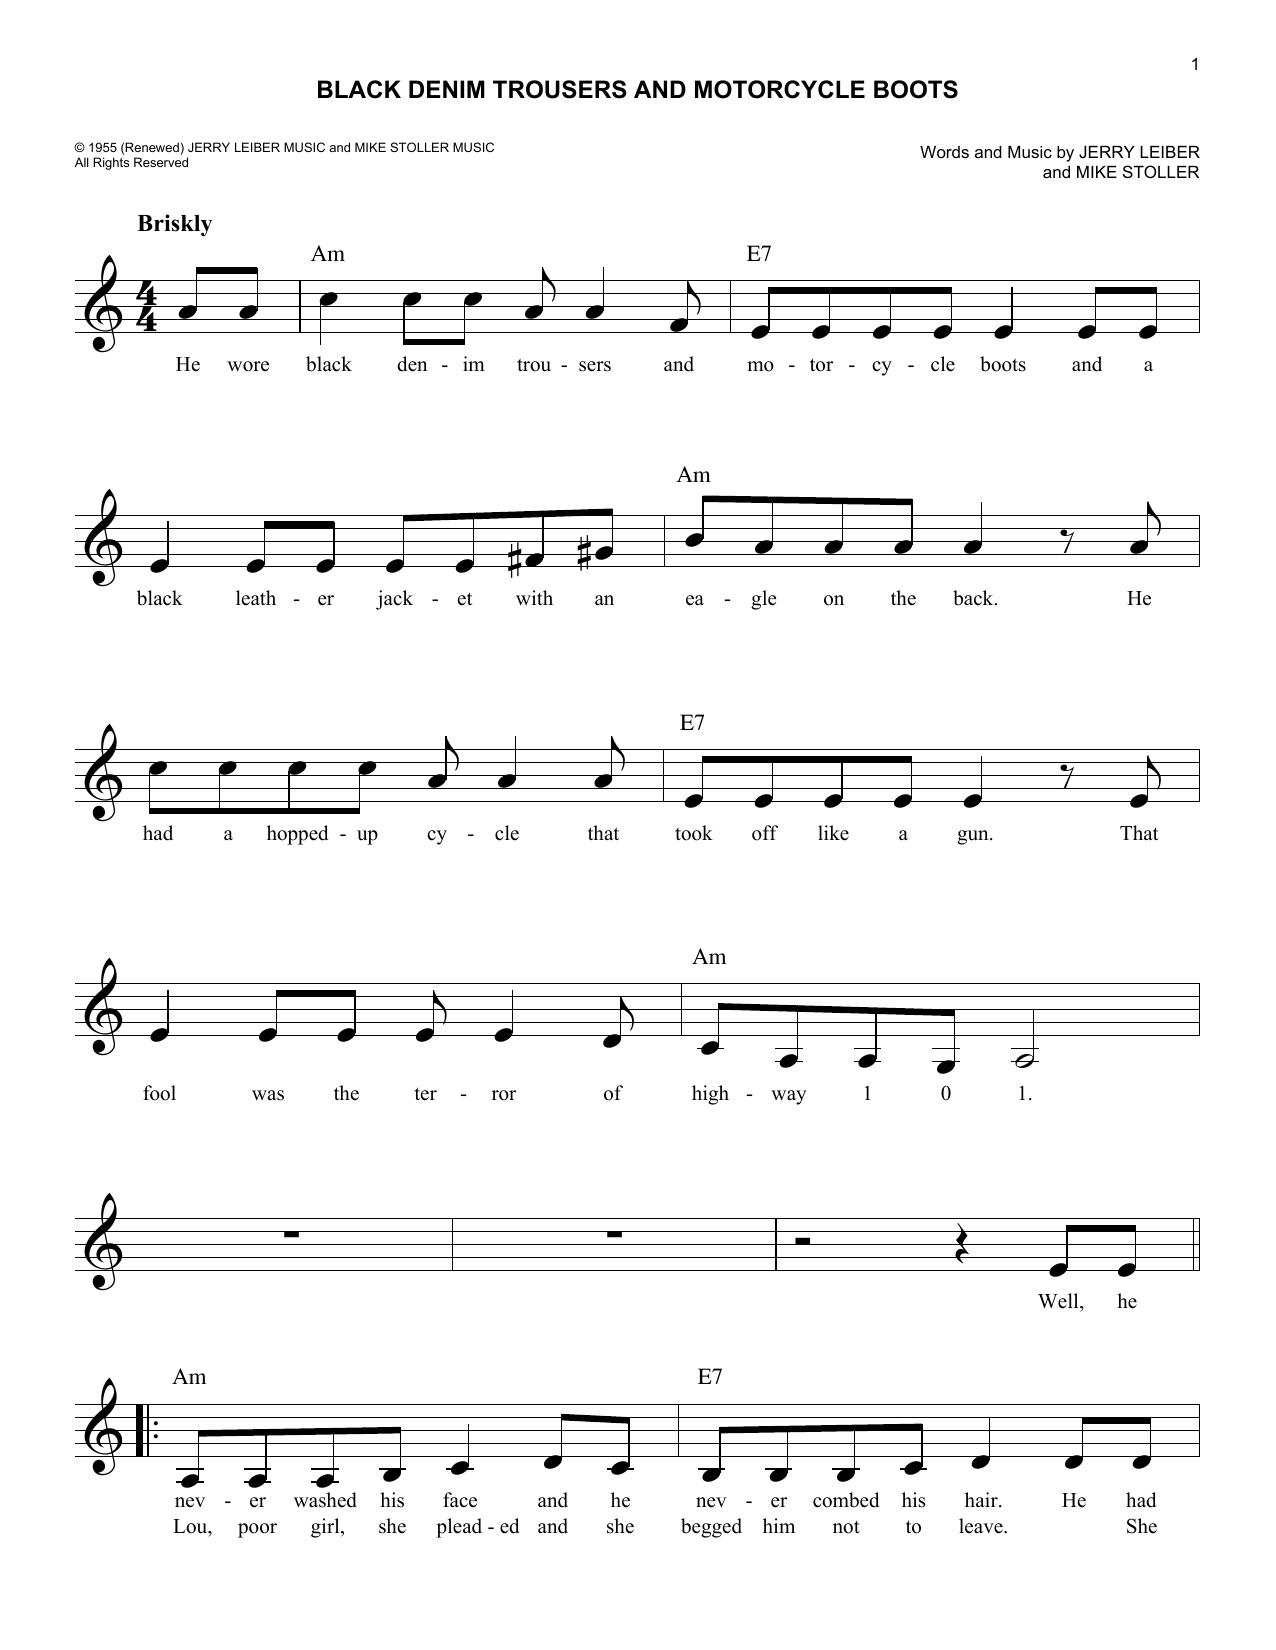 Download The Cheers Black Denim Trousers And Motorcycle Boo Sheet Music